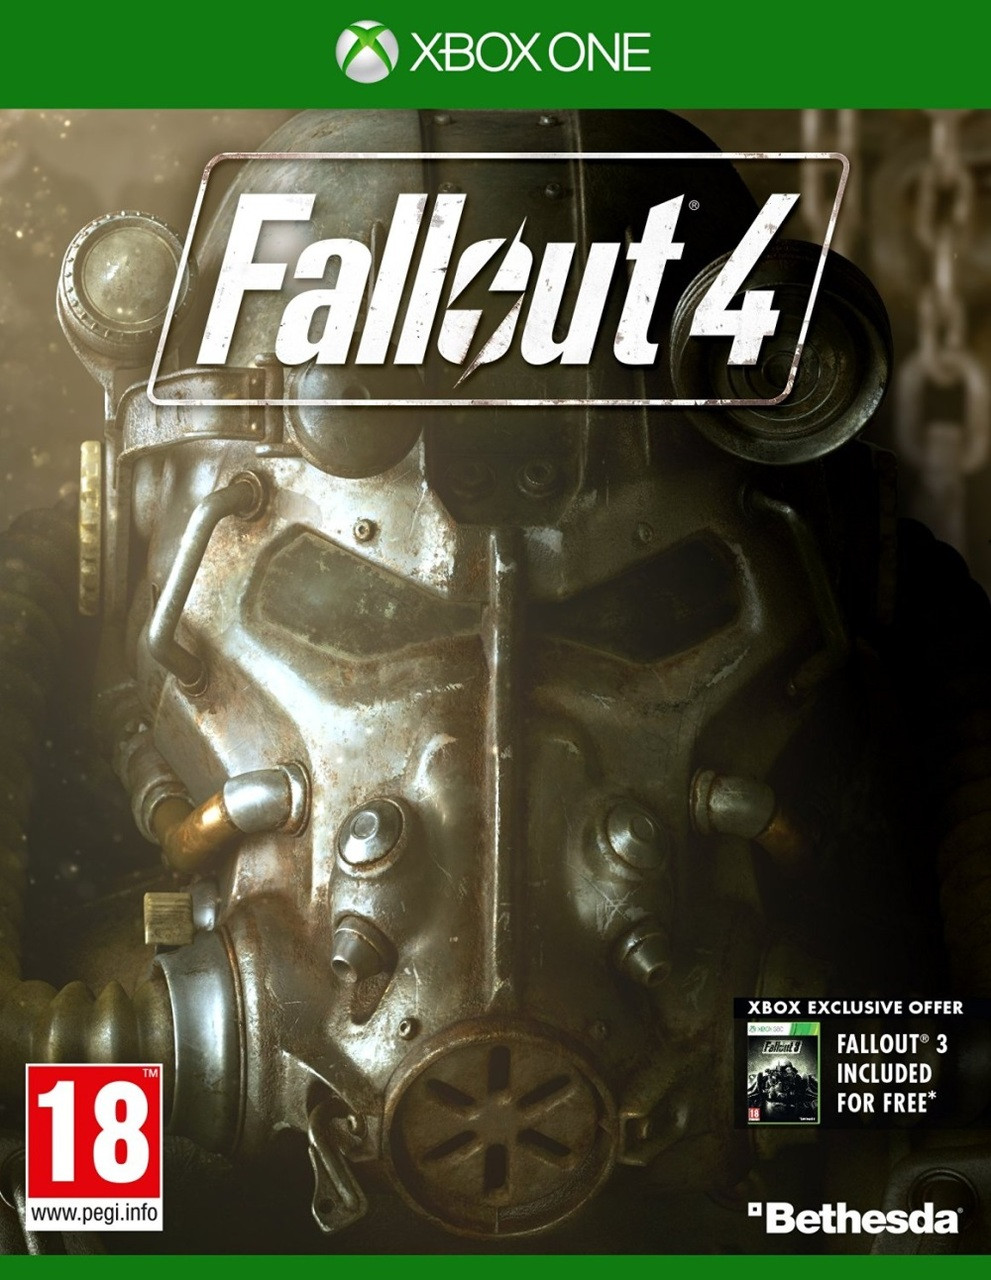 Fallout 4 (Xbox One) - DVDGAMING Direct Outlet Store